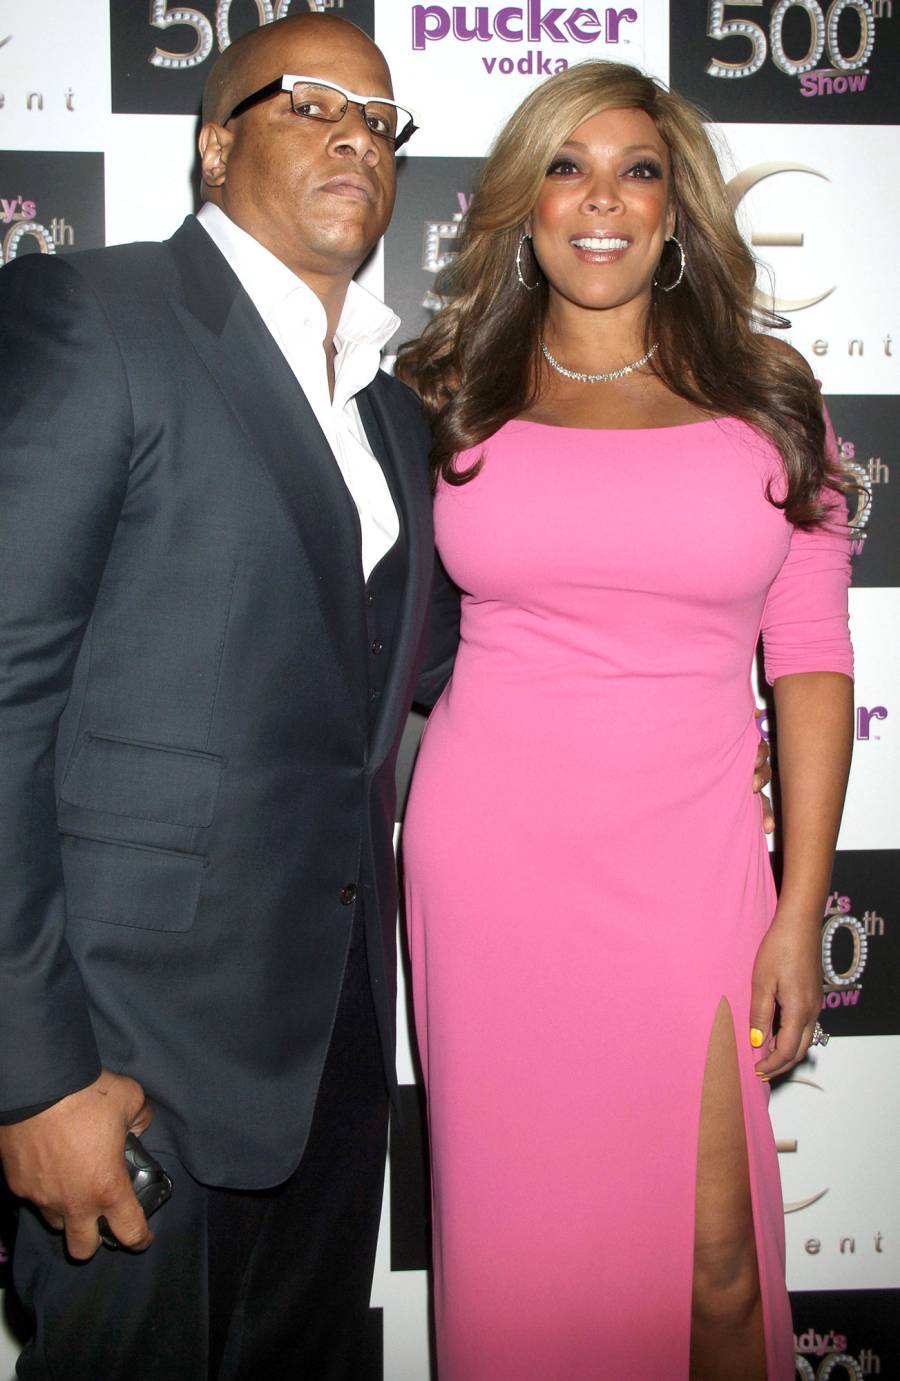 Kevin Hunter and Wendy Williams Hollywood's Ugliest Divorces